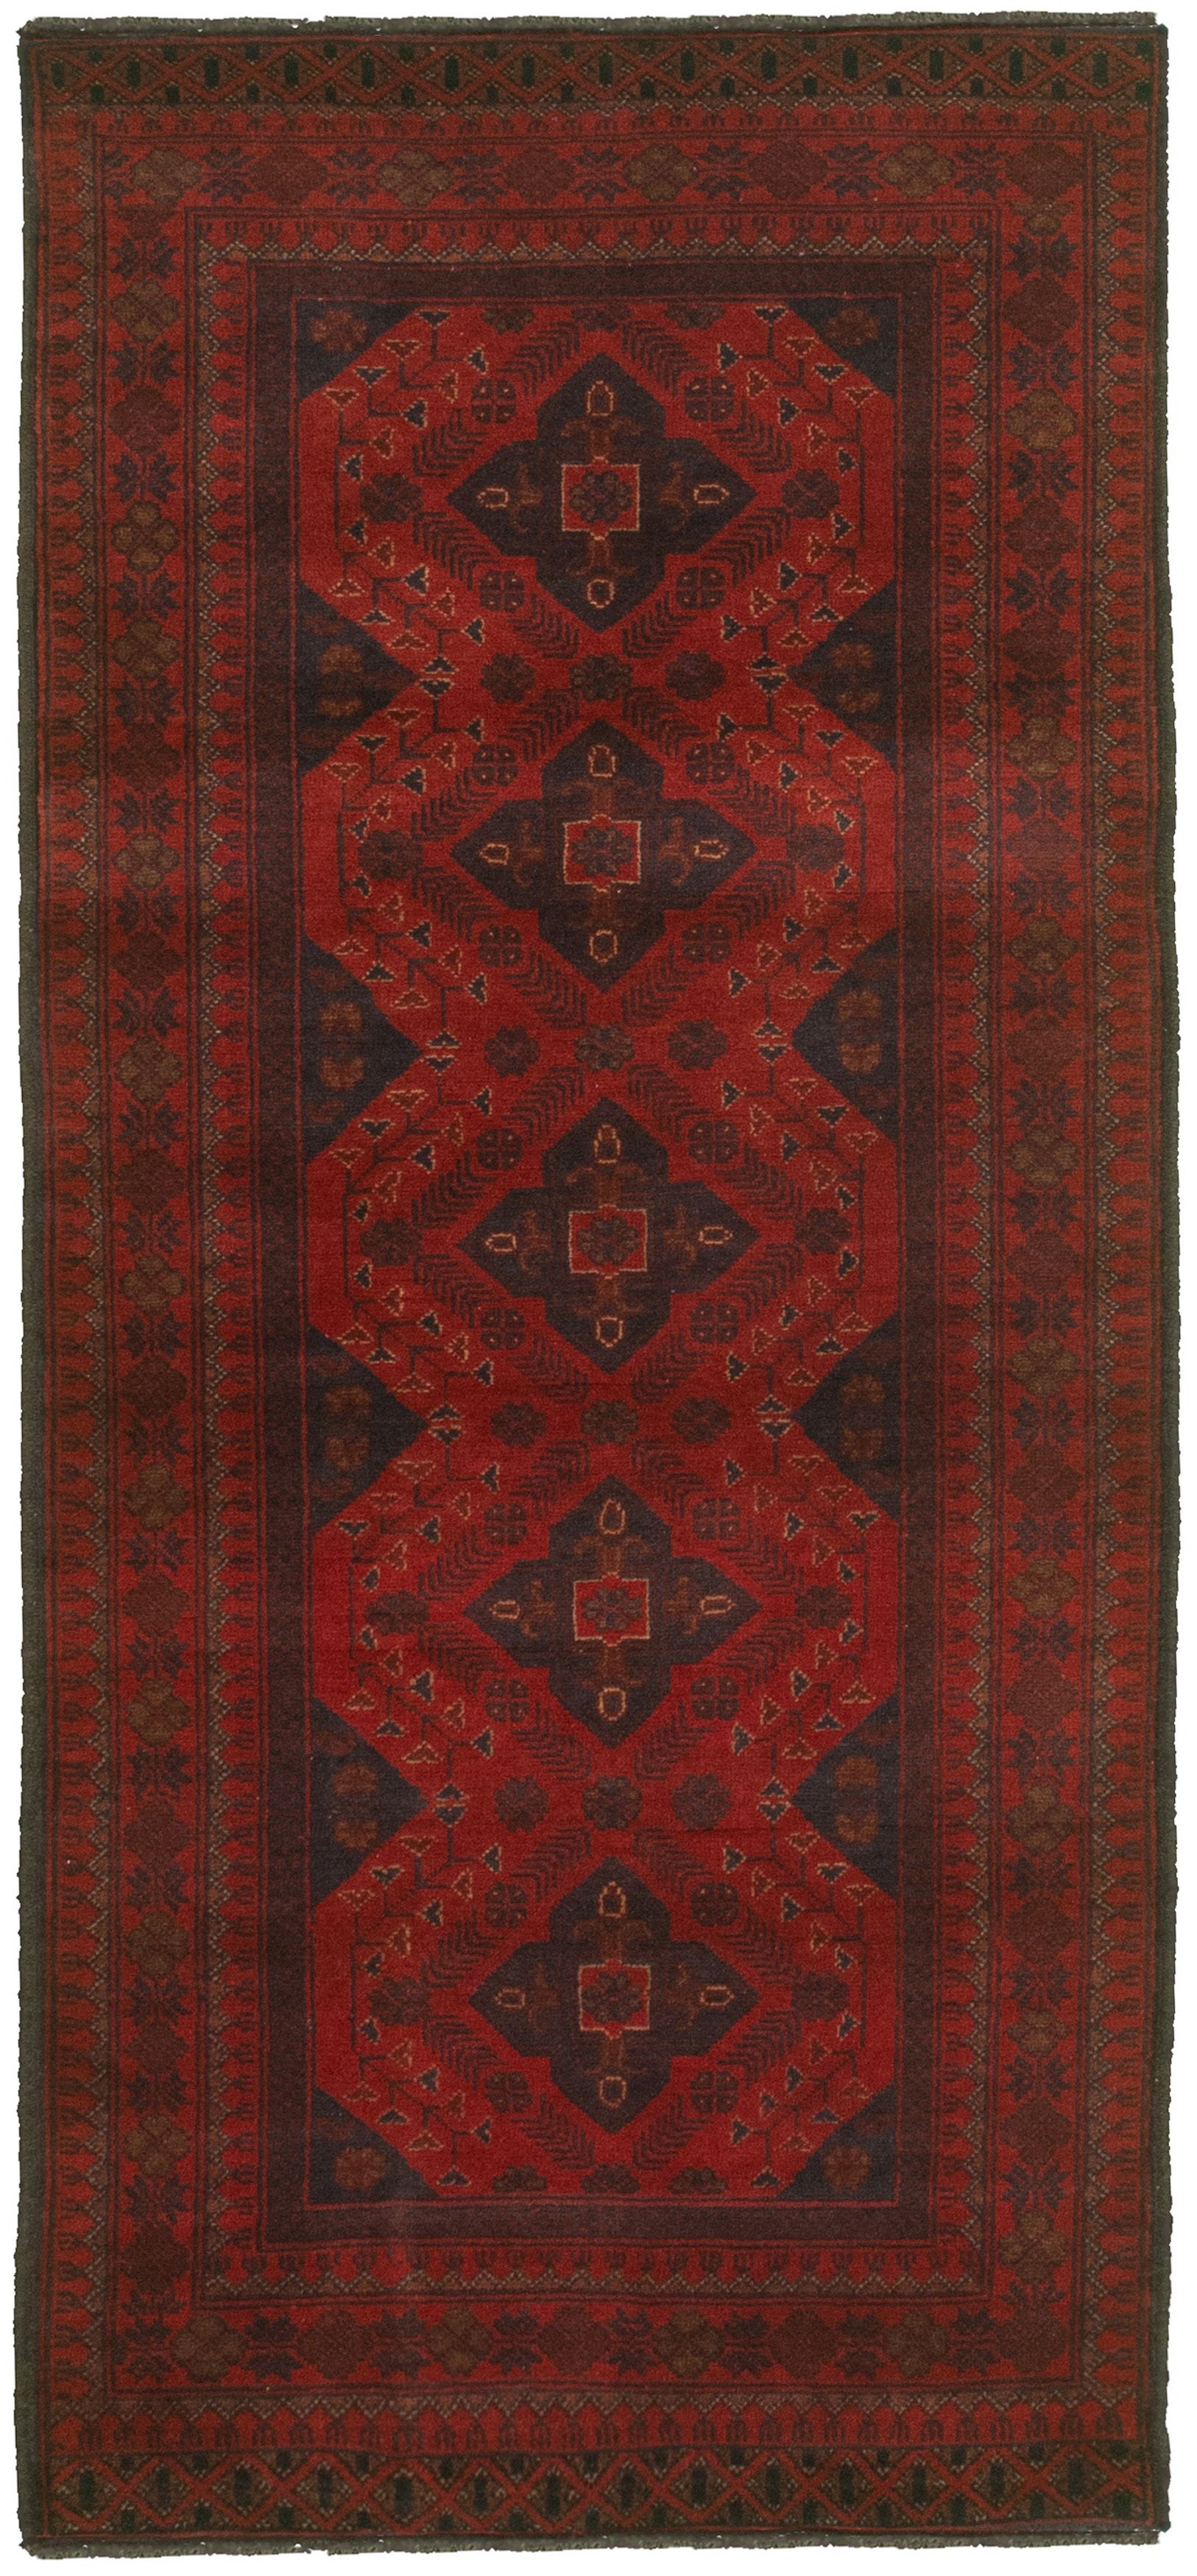 Hand-knotted Finest Khal Mohammadi Red  Rug 2'9" x 6'4"  Size: 2'9" x 6'4"  